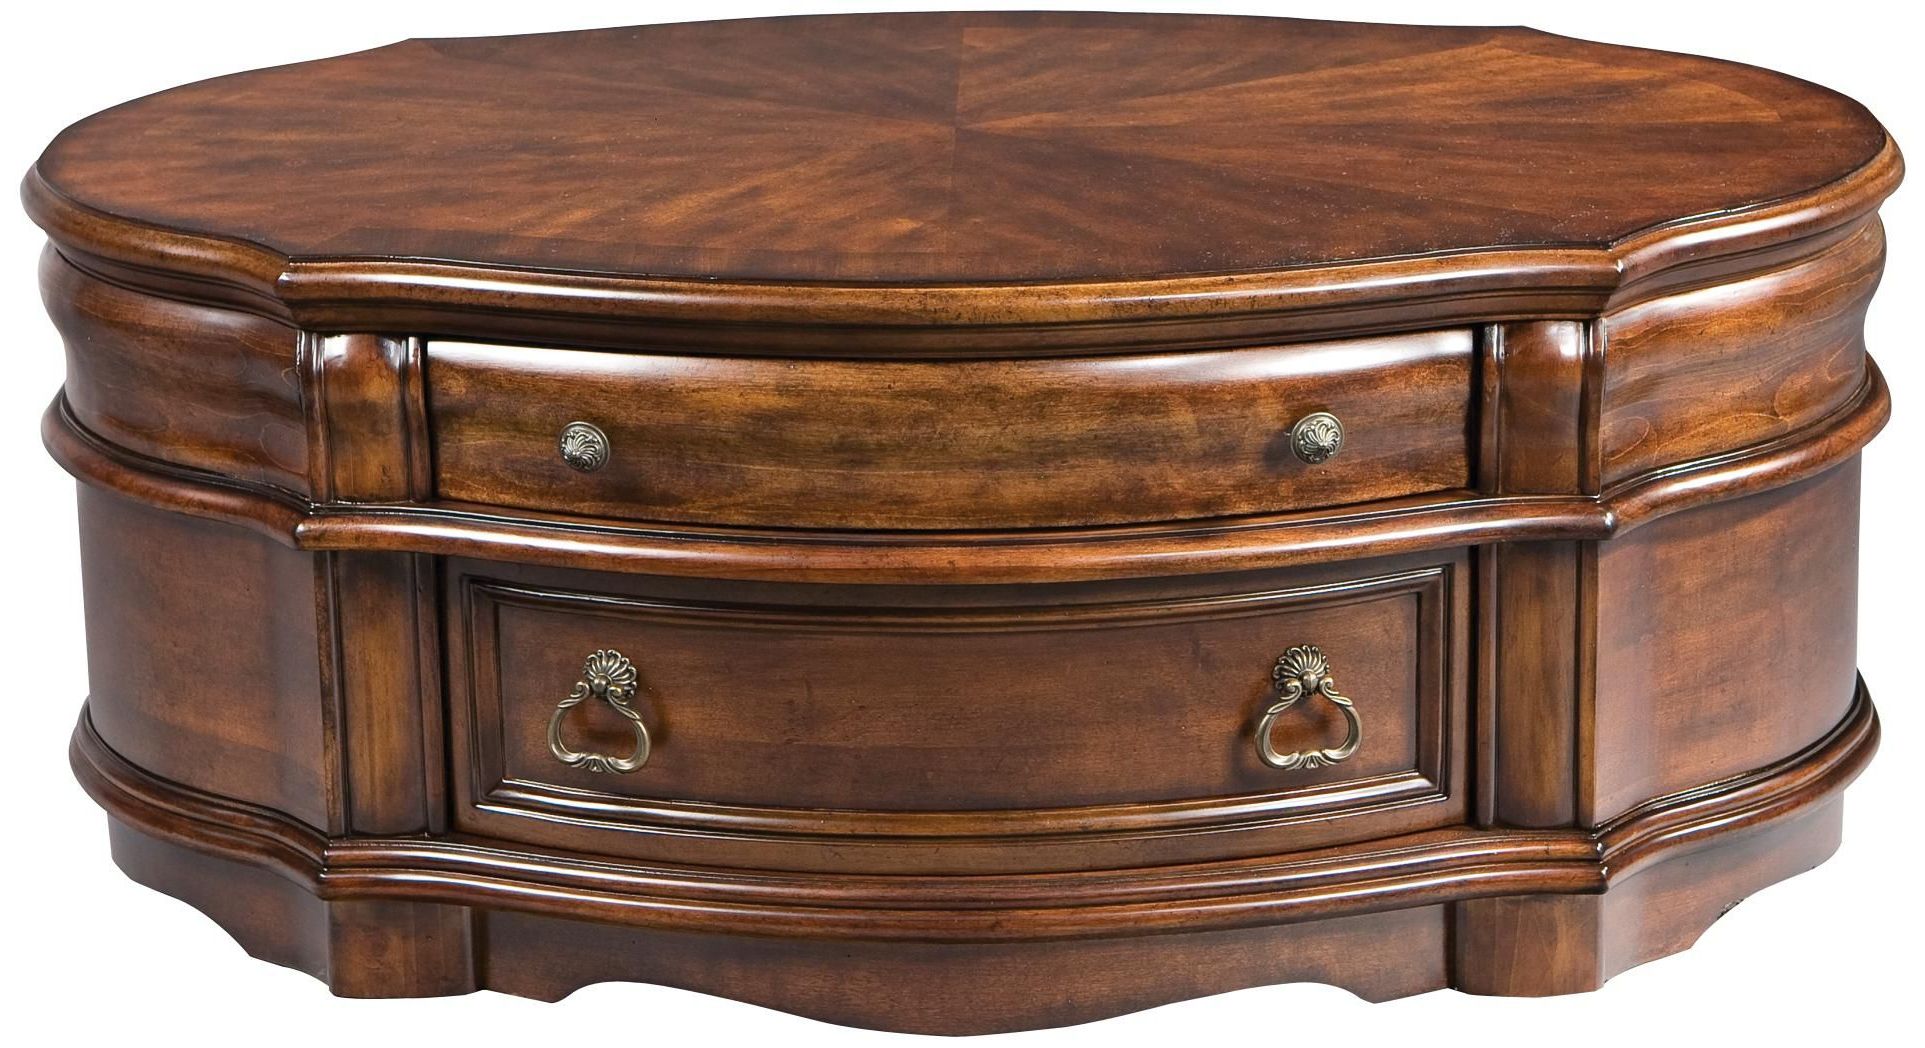 Widely Used Adrianna Ll 2 Drawer Coffee Table – Oval With 2 Drawers Within 2 Drawer Coffee Tables (View 16 of 20)